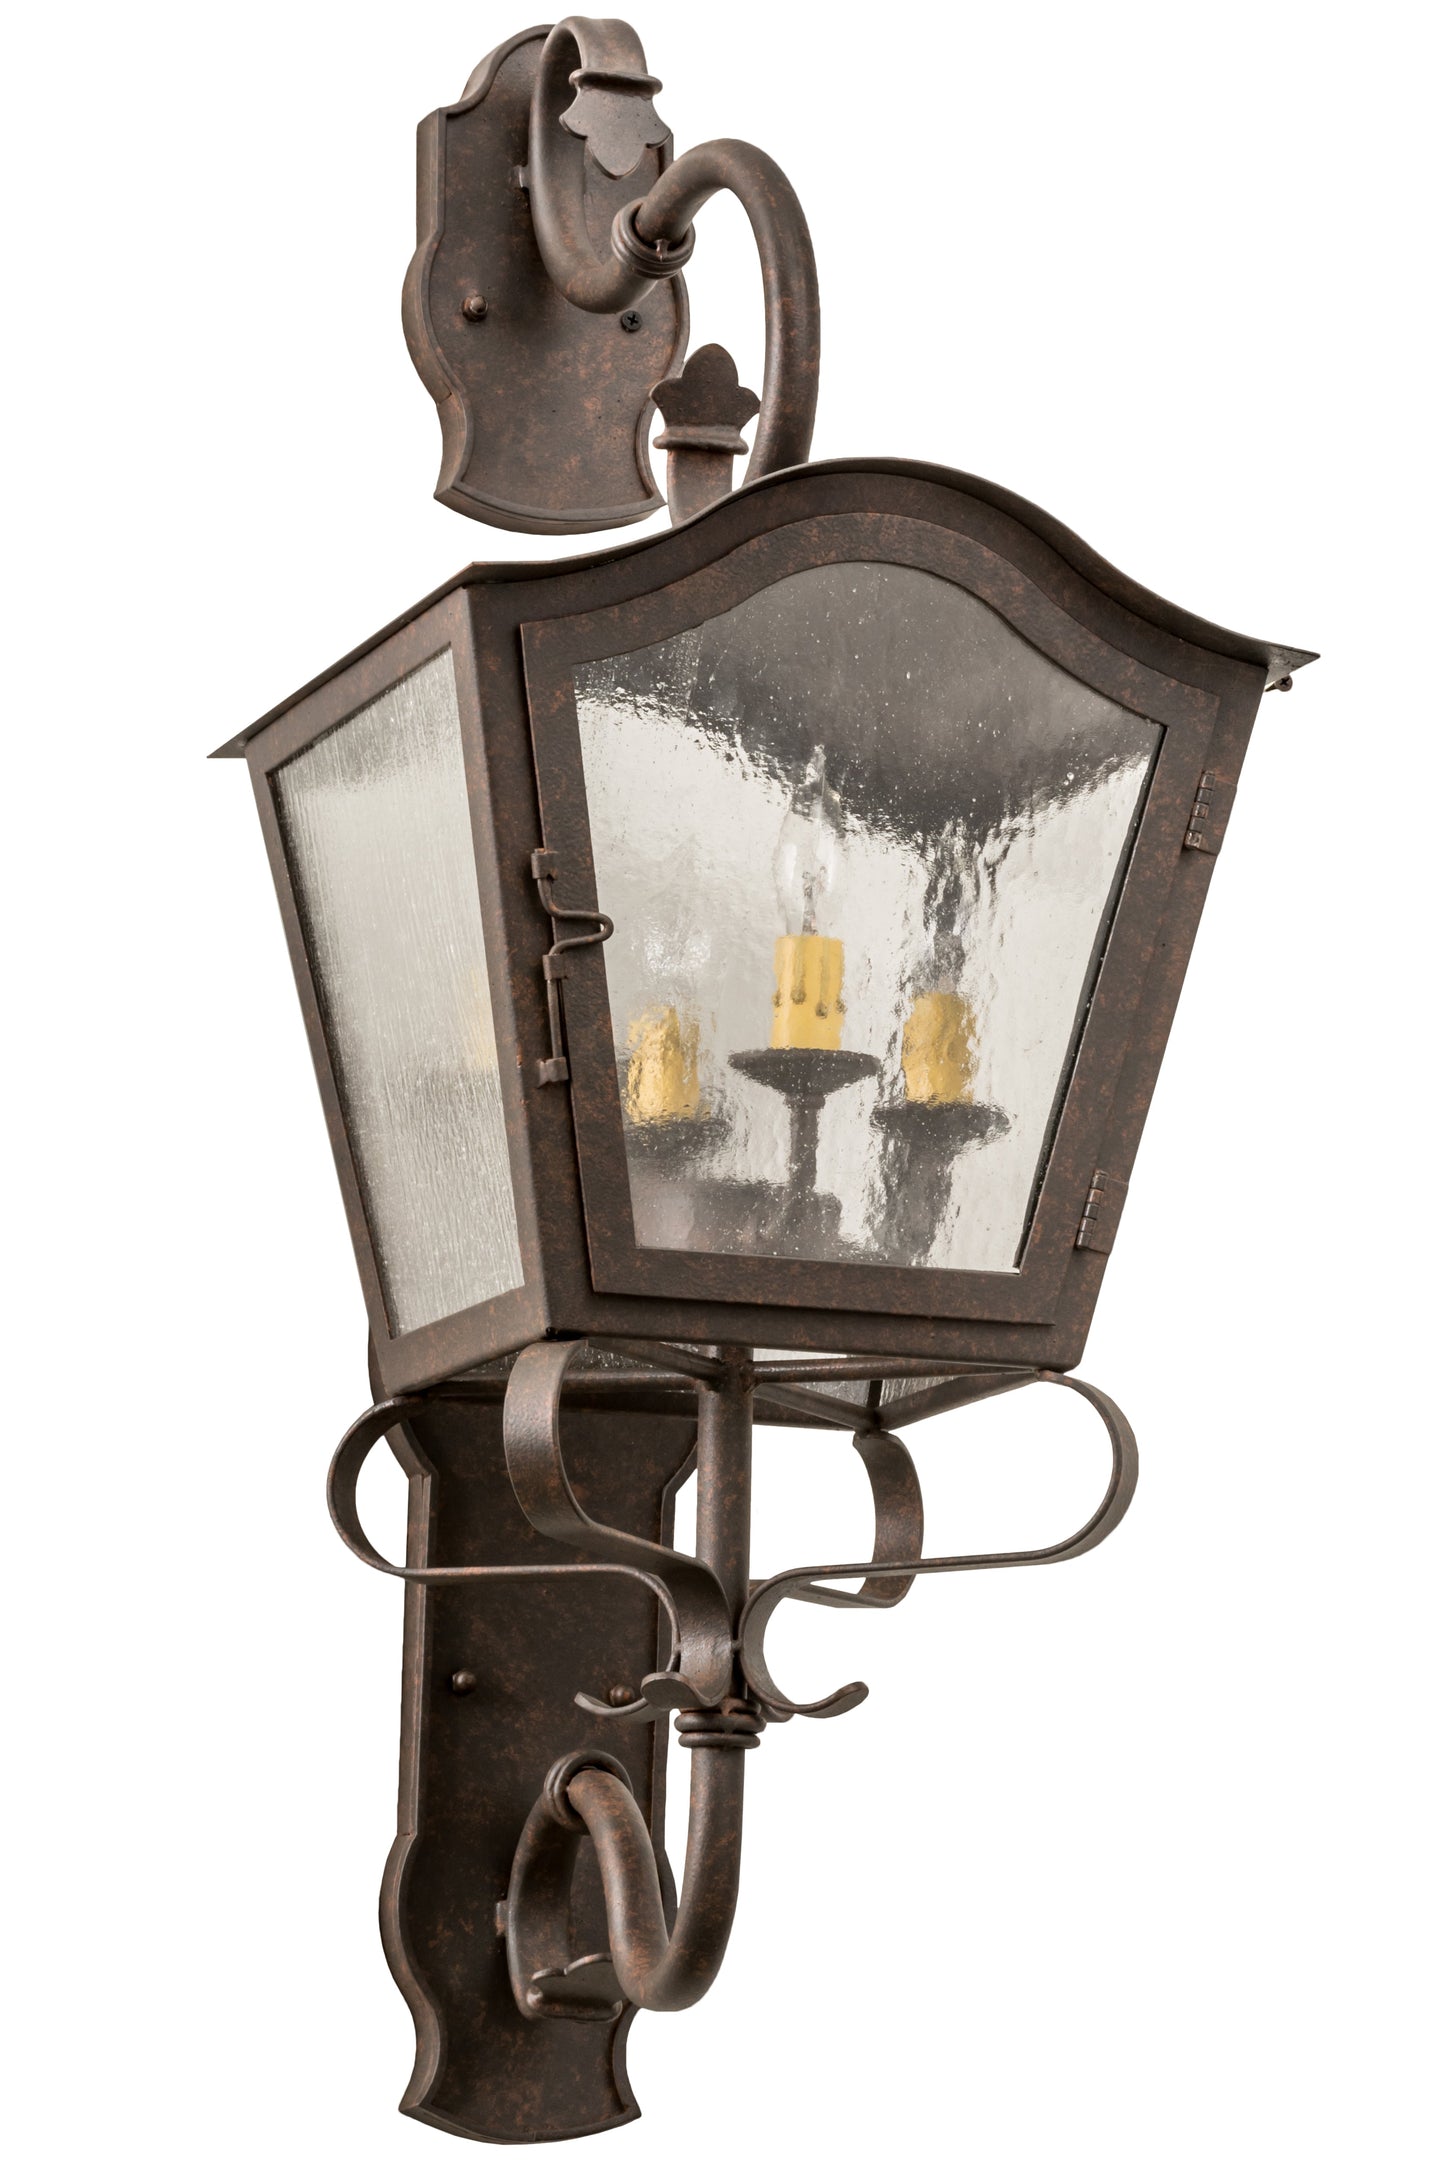 12" Christian Wall Sconce by 2nd Ave Lighting